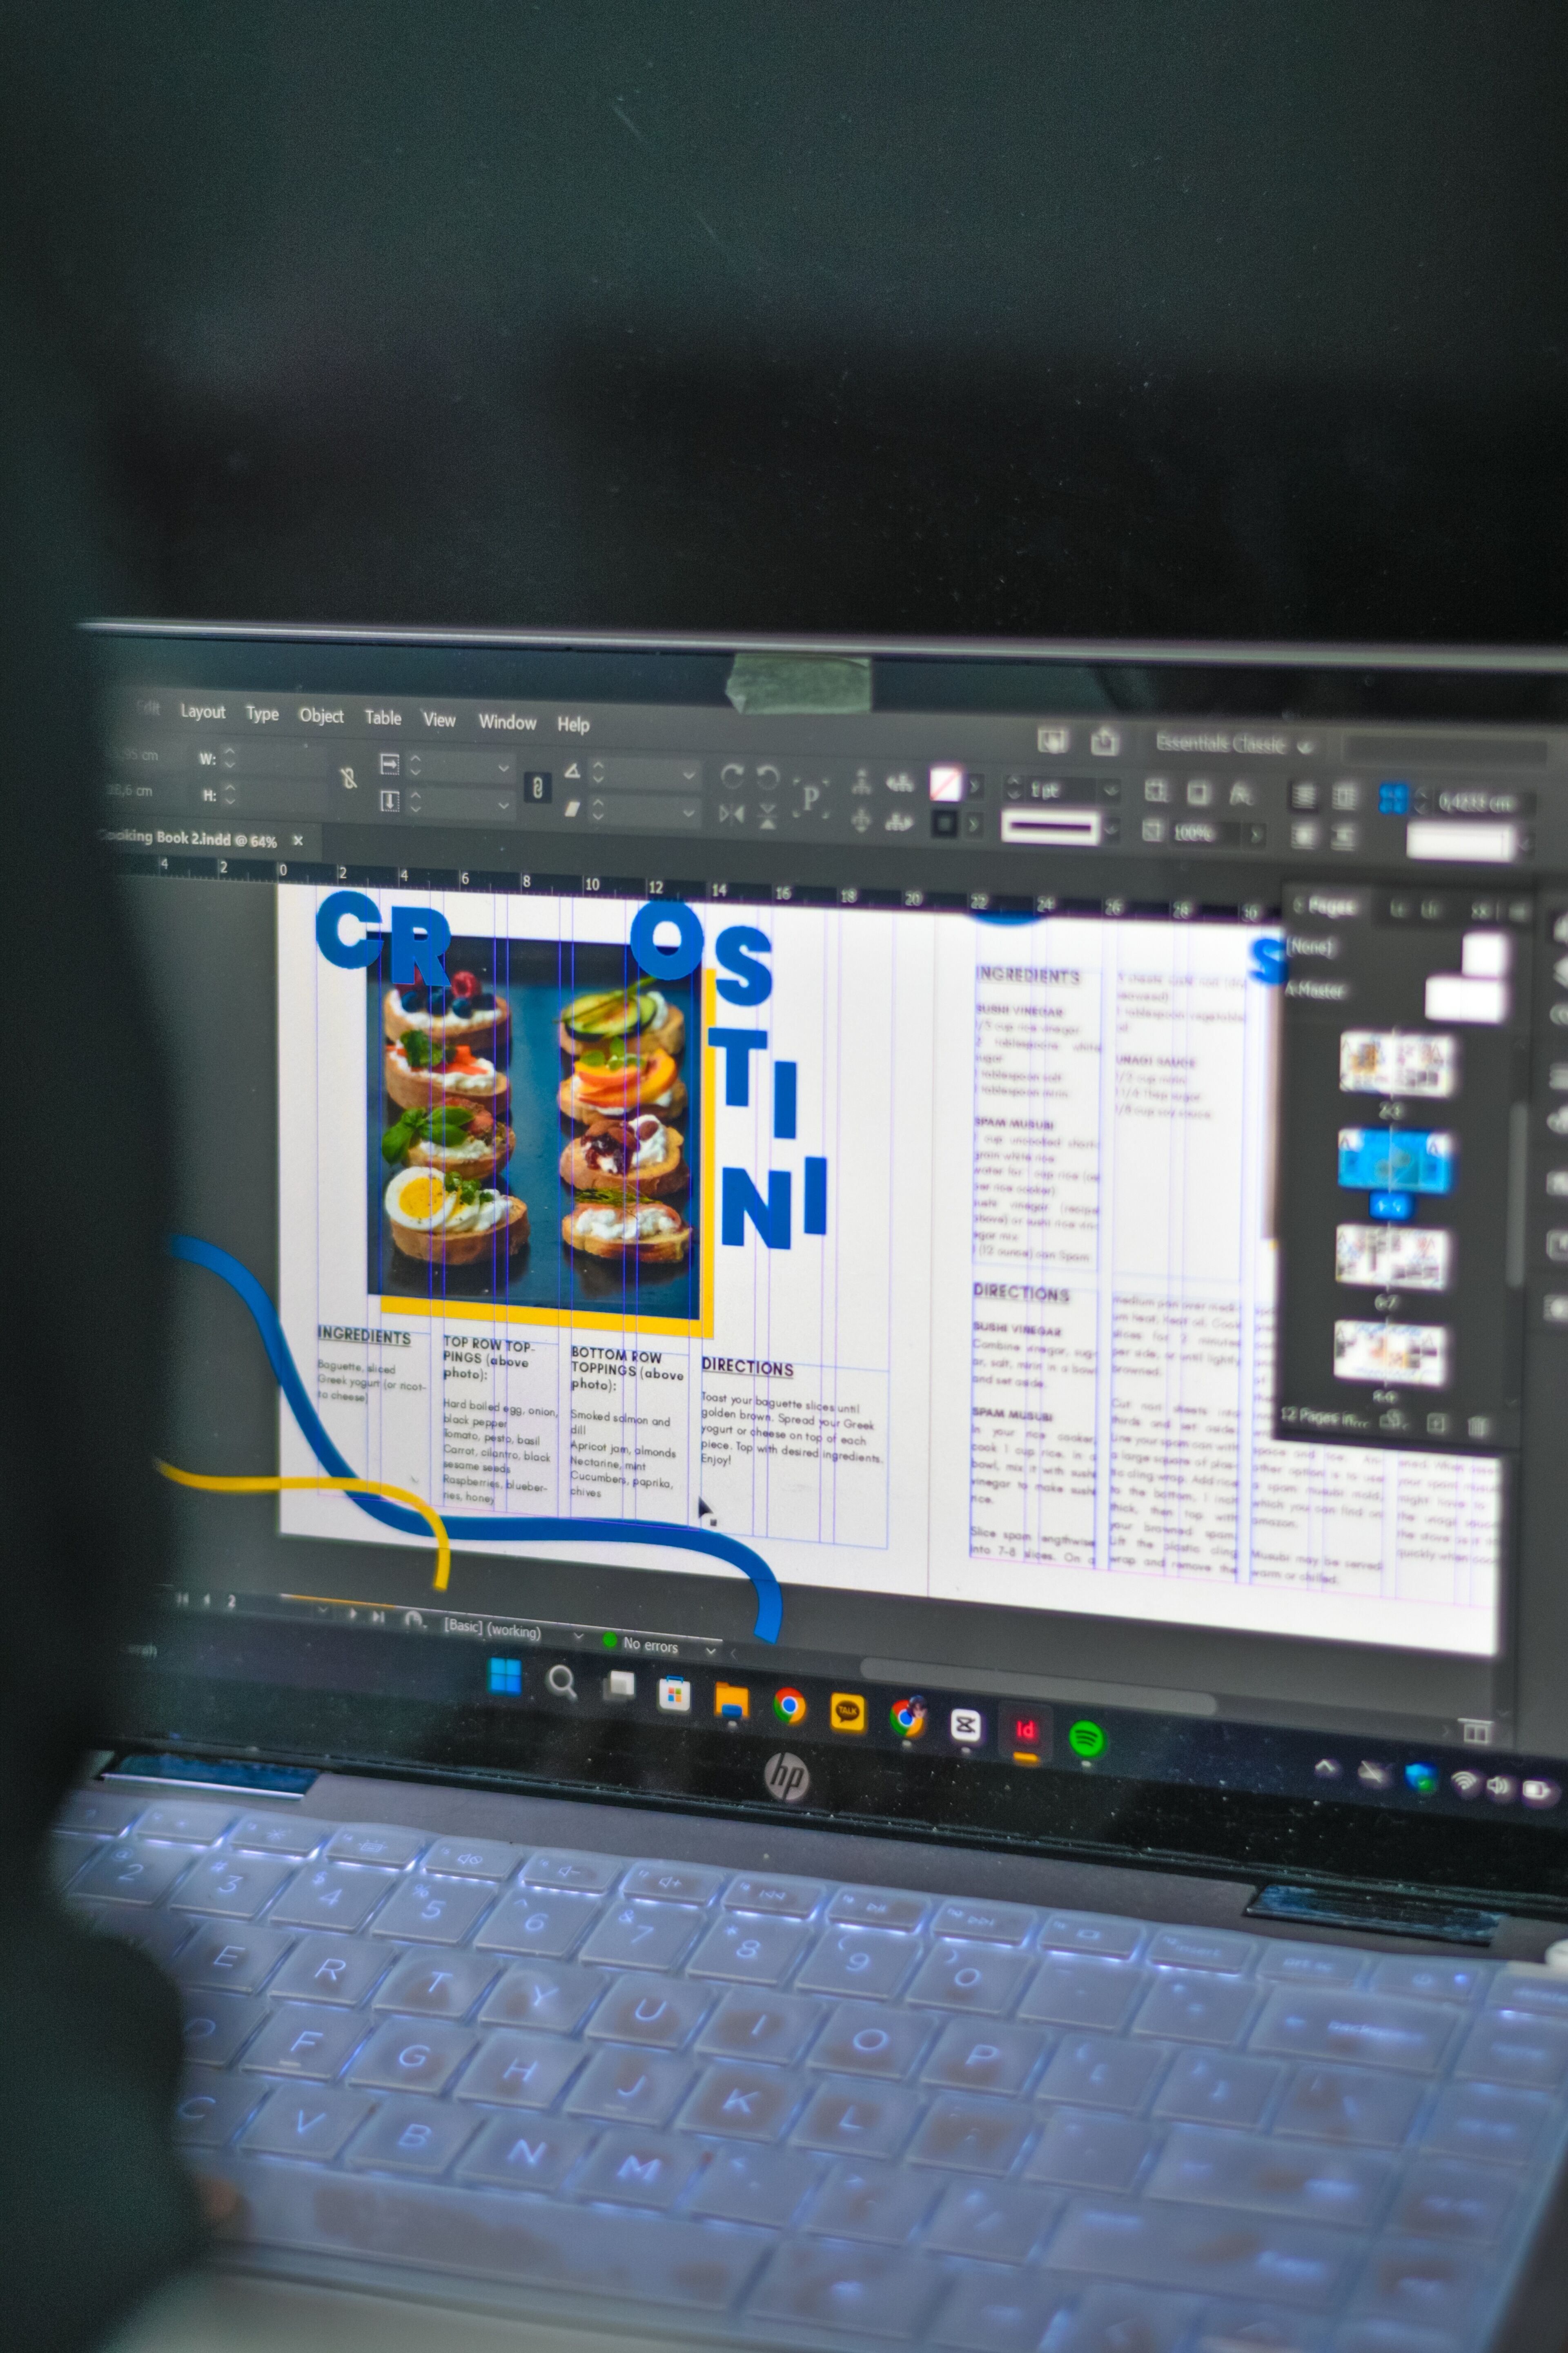 A laptop screen showing a detailed recipe layout for 'Crostini', including images, ingredients, and directions.